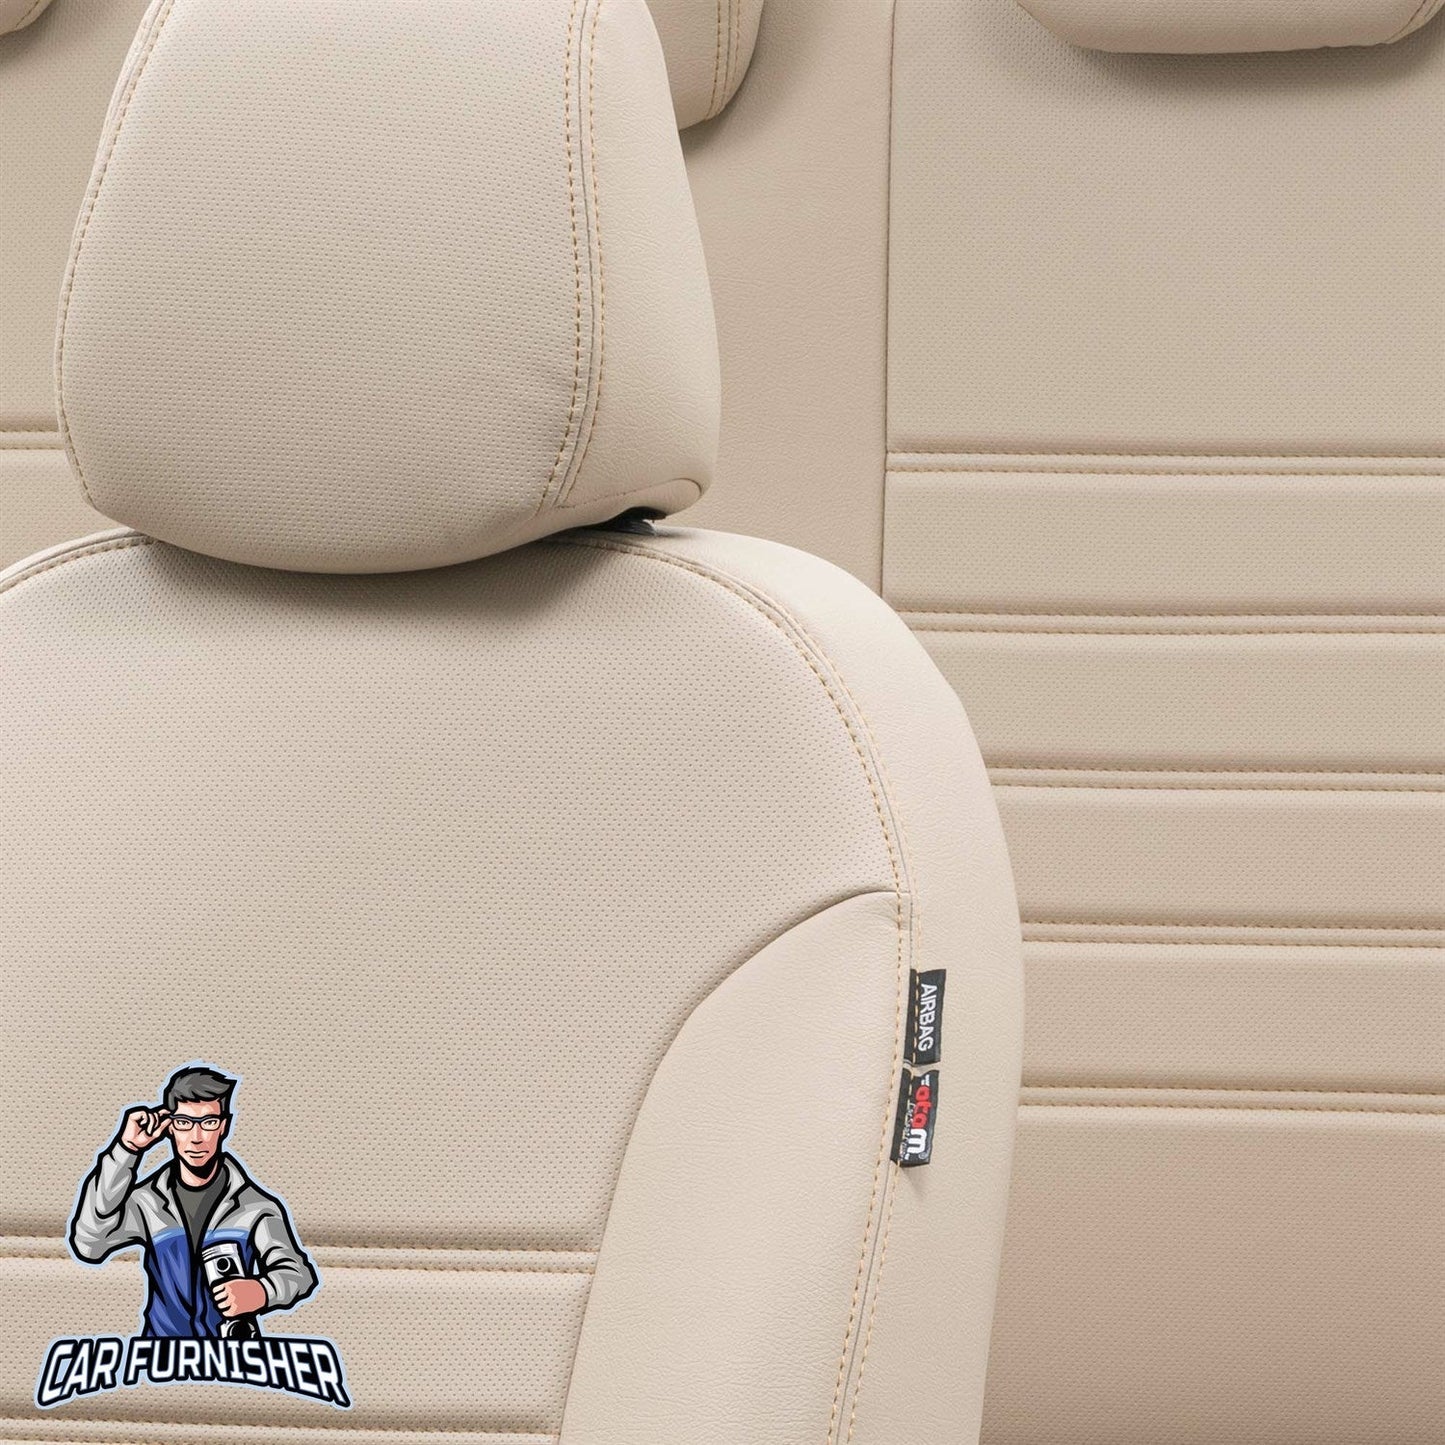 Dacia Lodgy Seat Covers Istanbul Leather Design Beige Leather